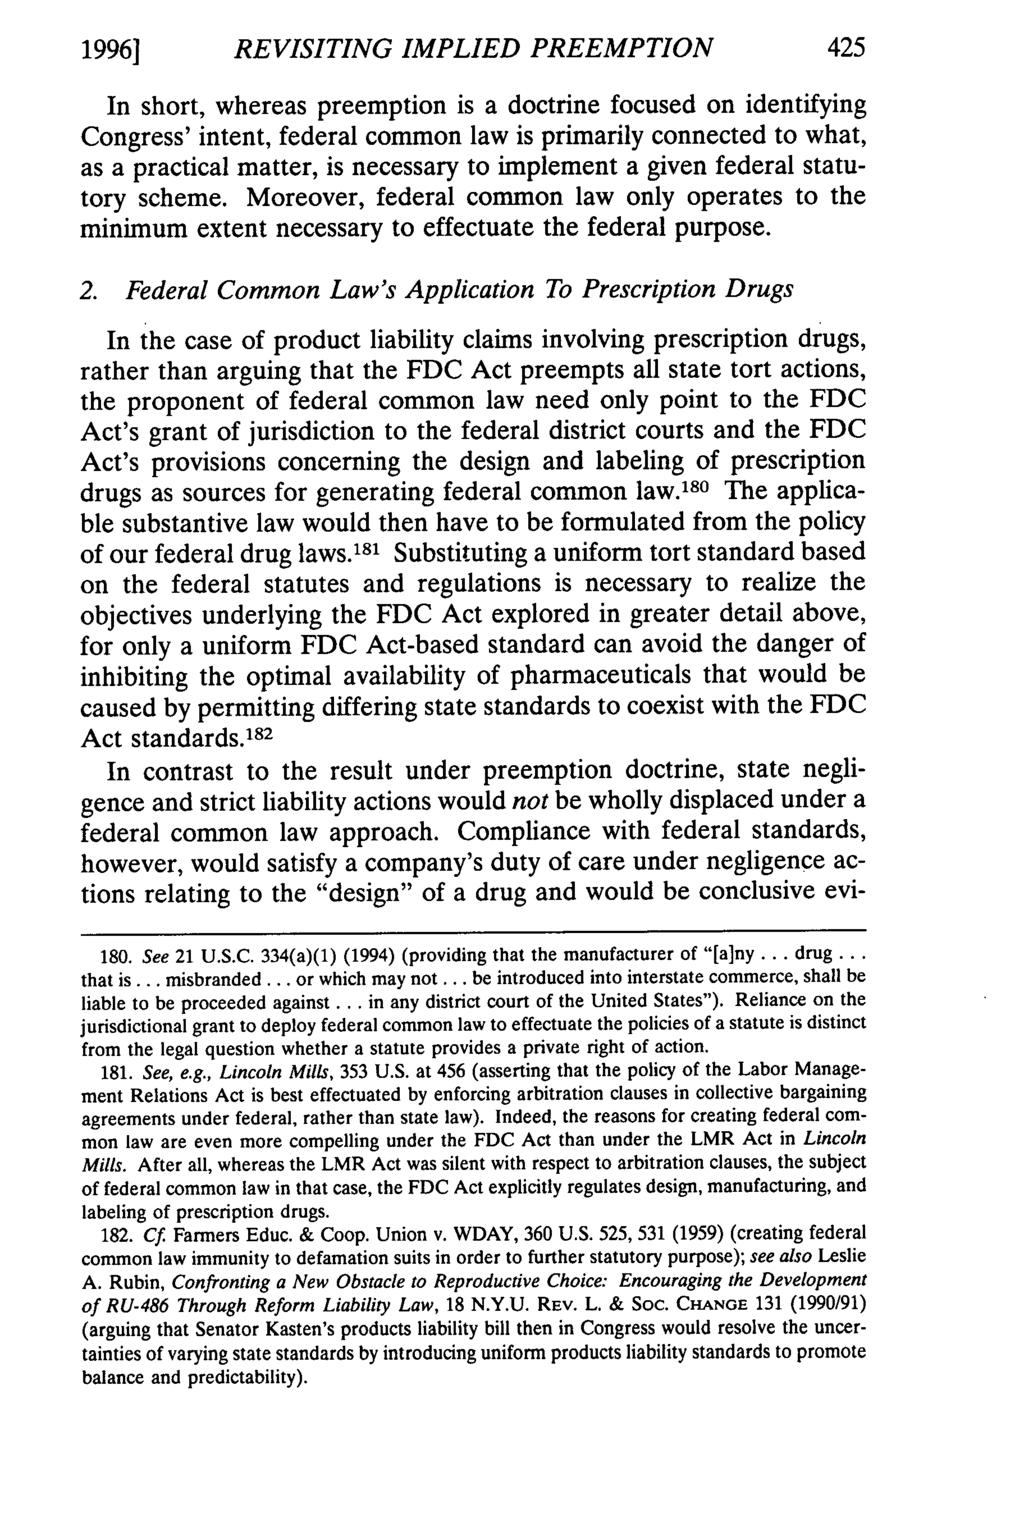 1996] REVISITING IMPLIED PREEMPTION In short, whereas preemption is a doctrine focused on identifying Congress' intent, federal common law is primarily connected to what, as a practical matter, is